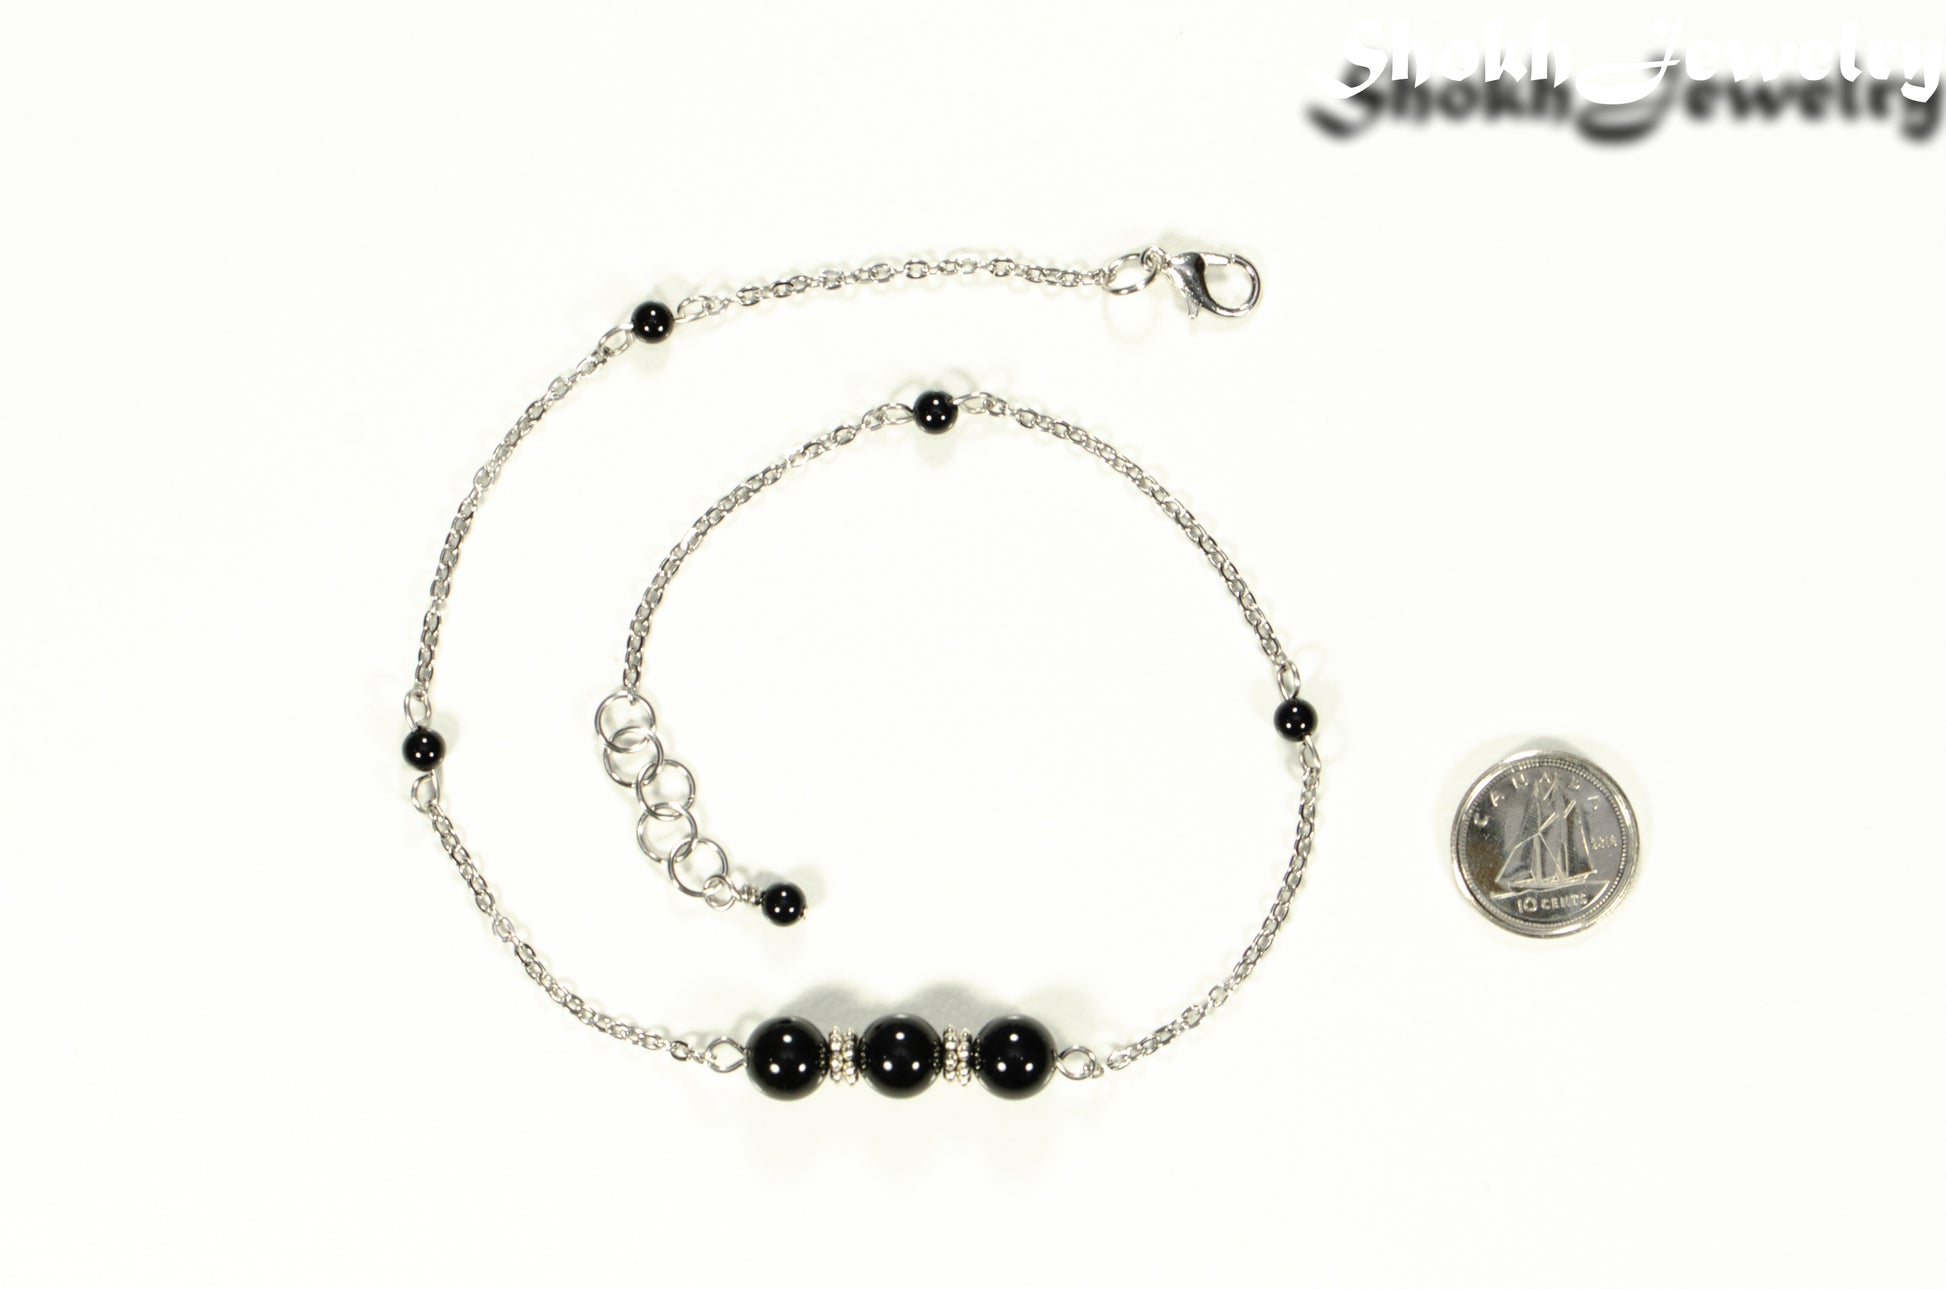 Natural Black Onyx and Chain Choker Necklace beside a dime.